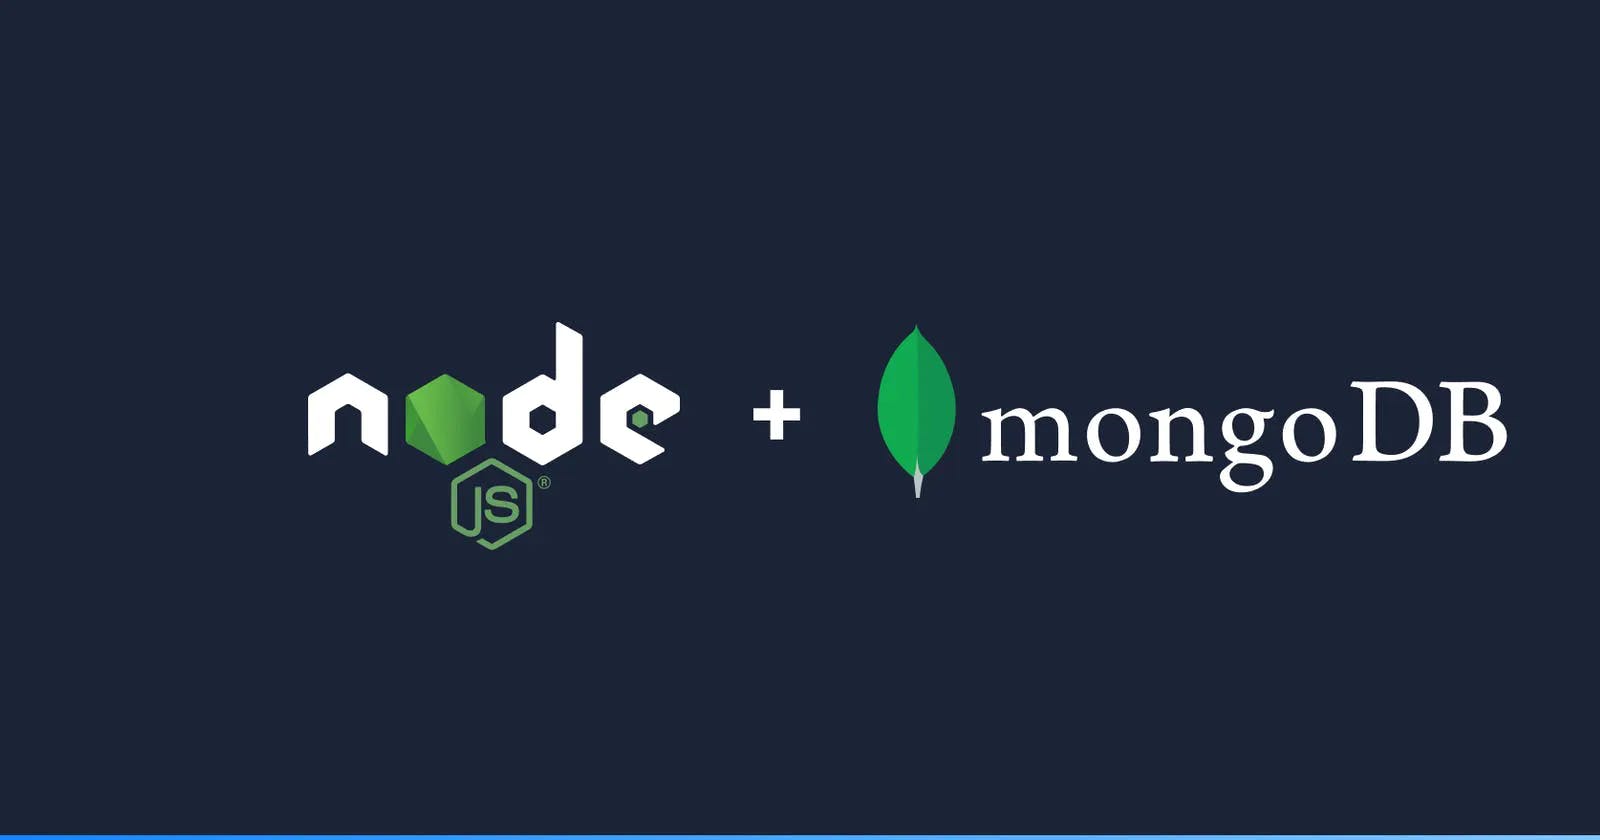 How to use MongoDB with Node.js